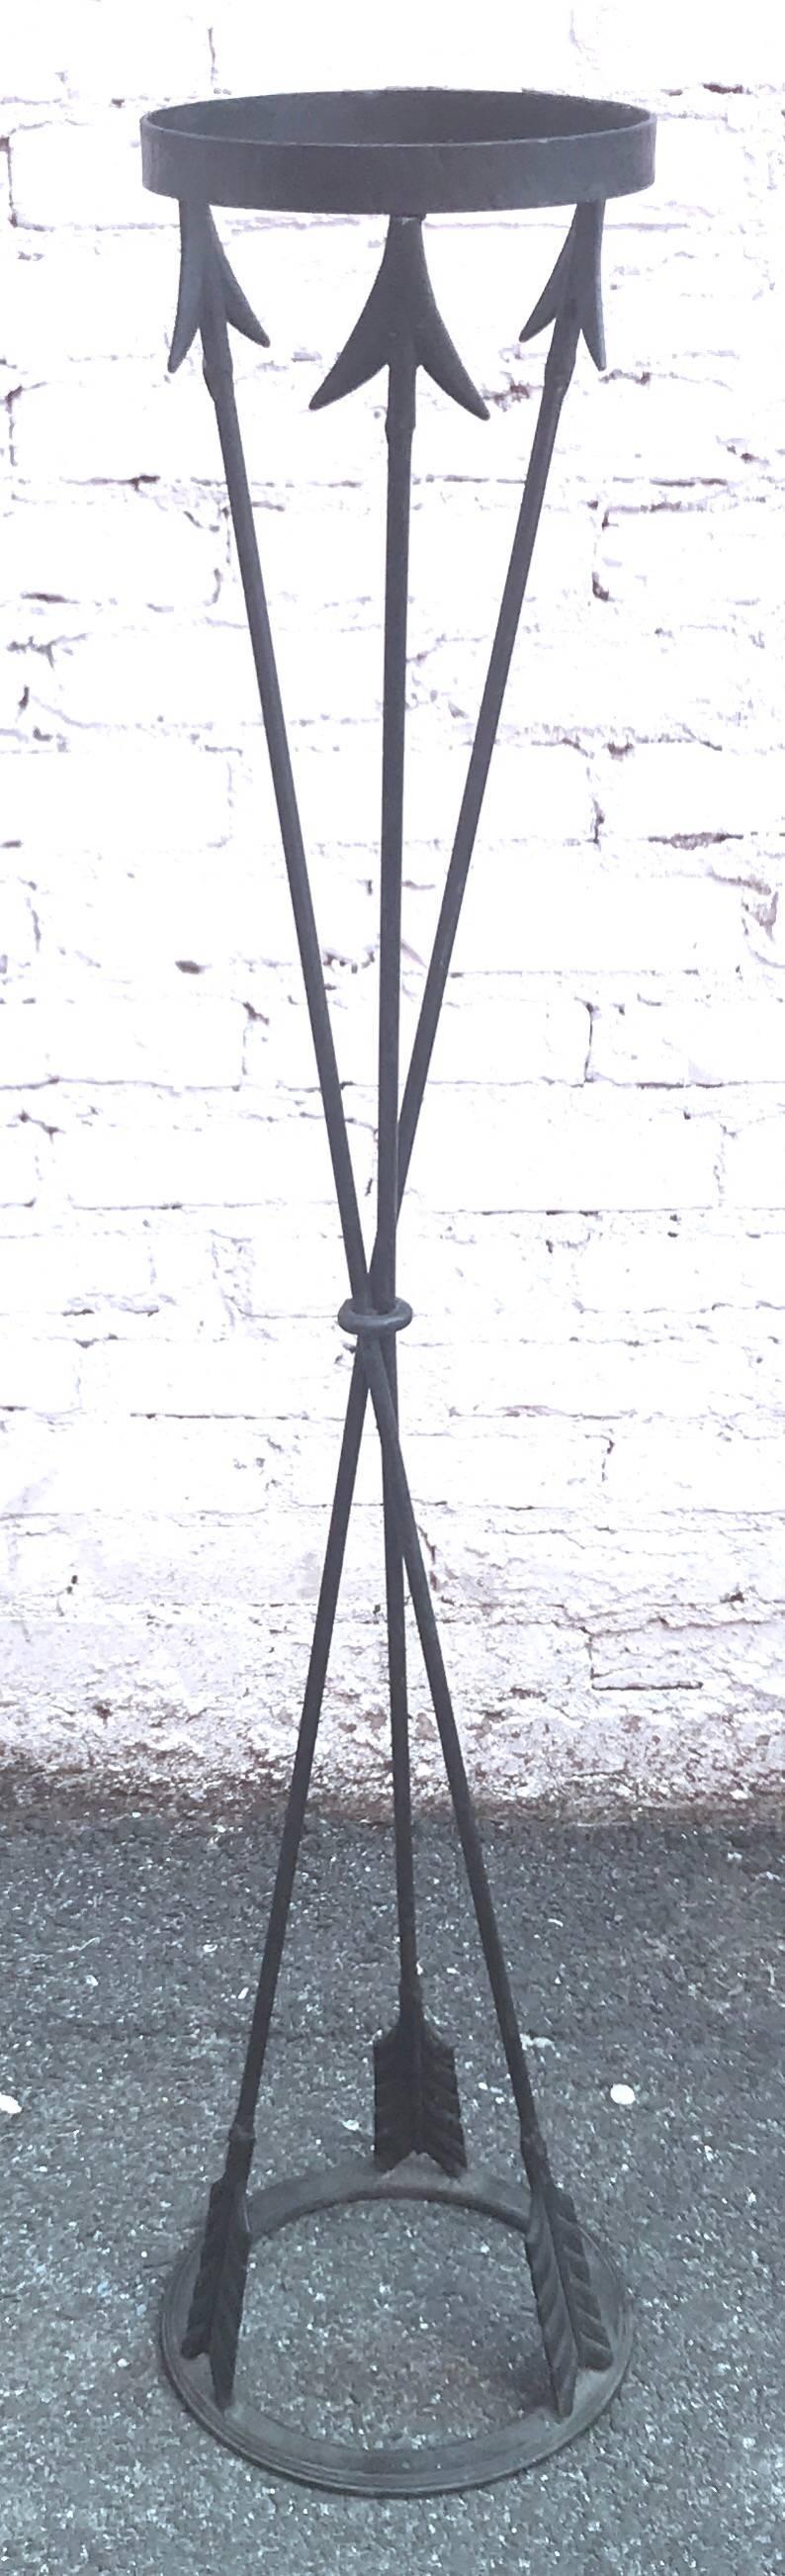 Chic French 1940s wrought iron plant stand or sculpture pedestal with arrow motif.